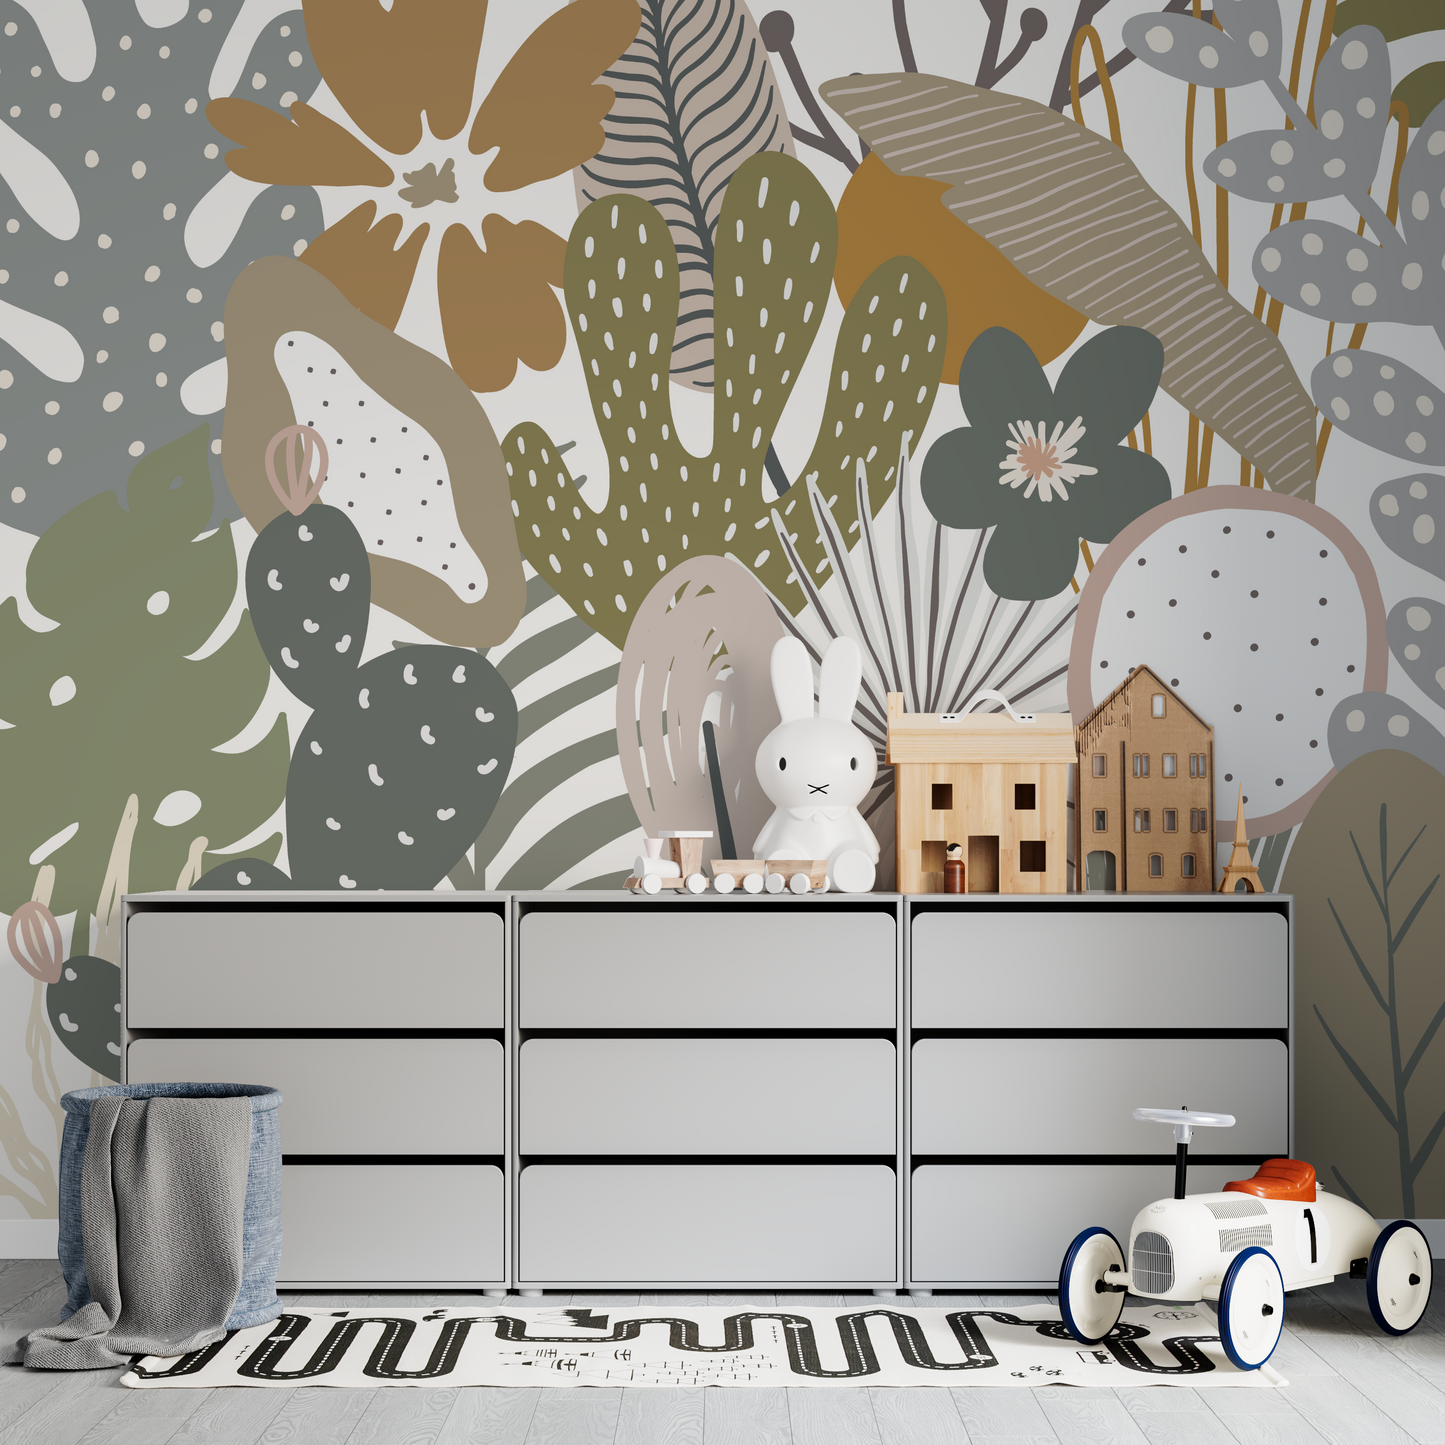 Load image into Gallery viewer, Margot Garden Wallpaper Mural - Munks and Me Wallpaper
